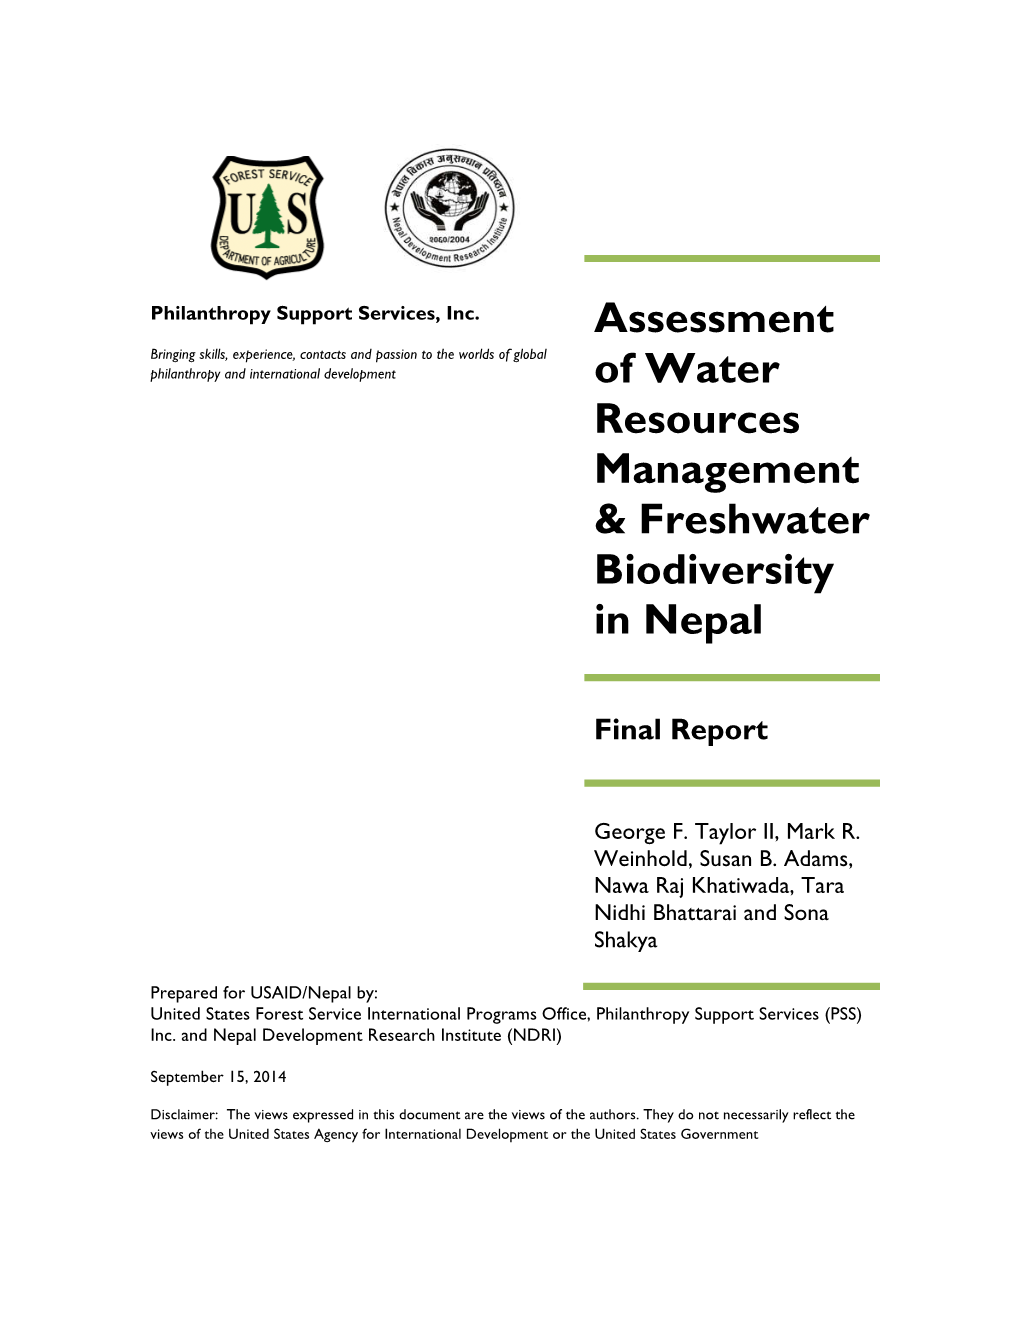 Assessment of Water Resources Management & Freshwater